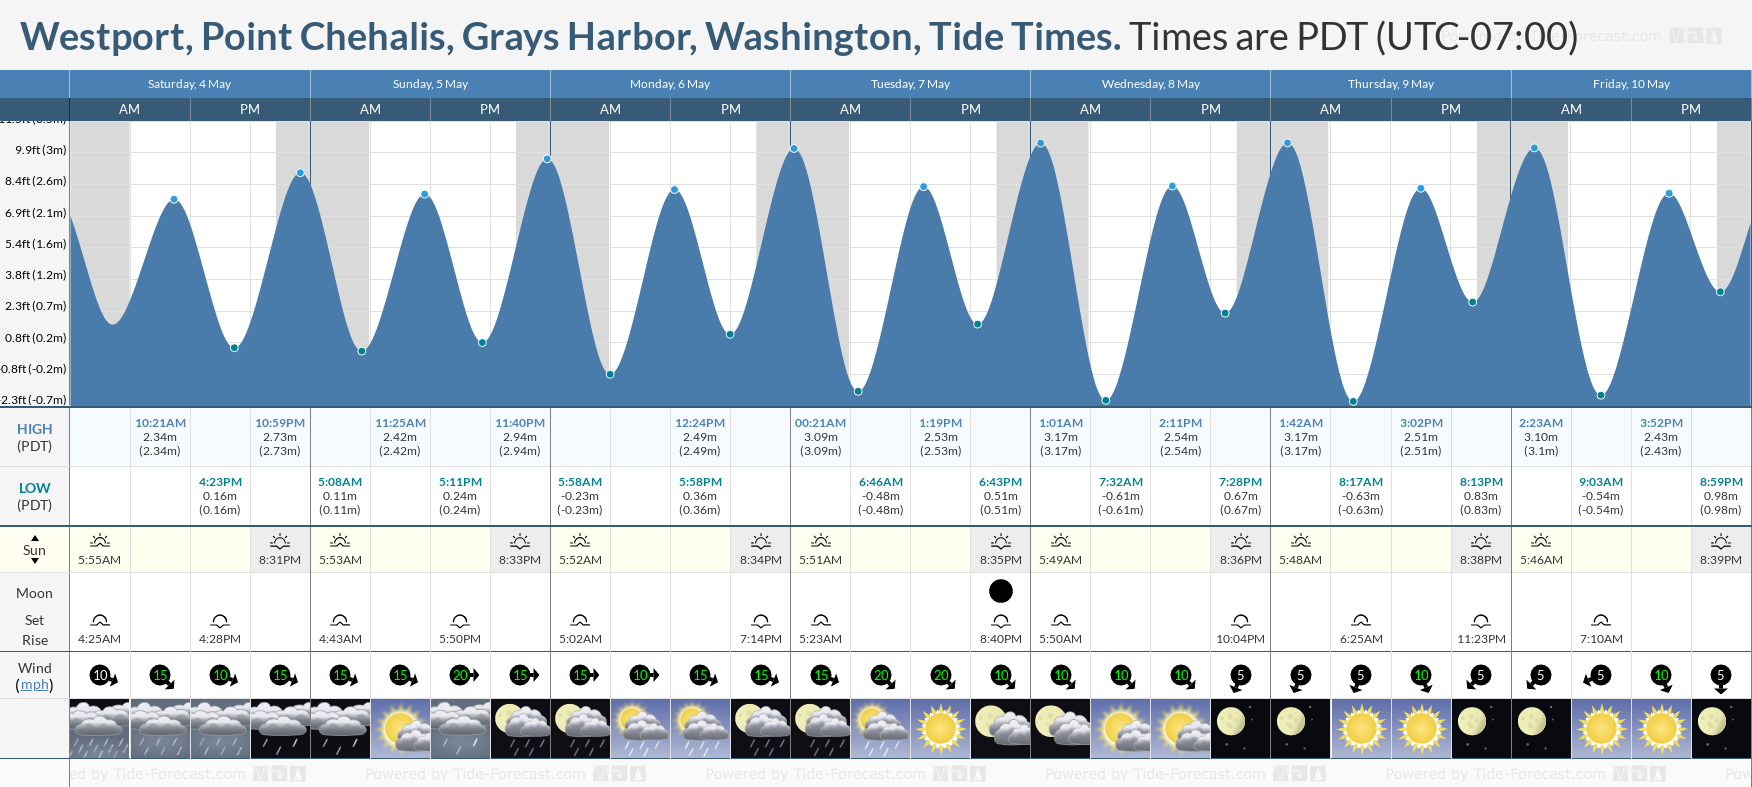 Westport, Point Chehalis, Grays Harbor, Washington Tide Chart including high and low tide tide times for the next 7 days